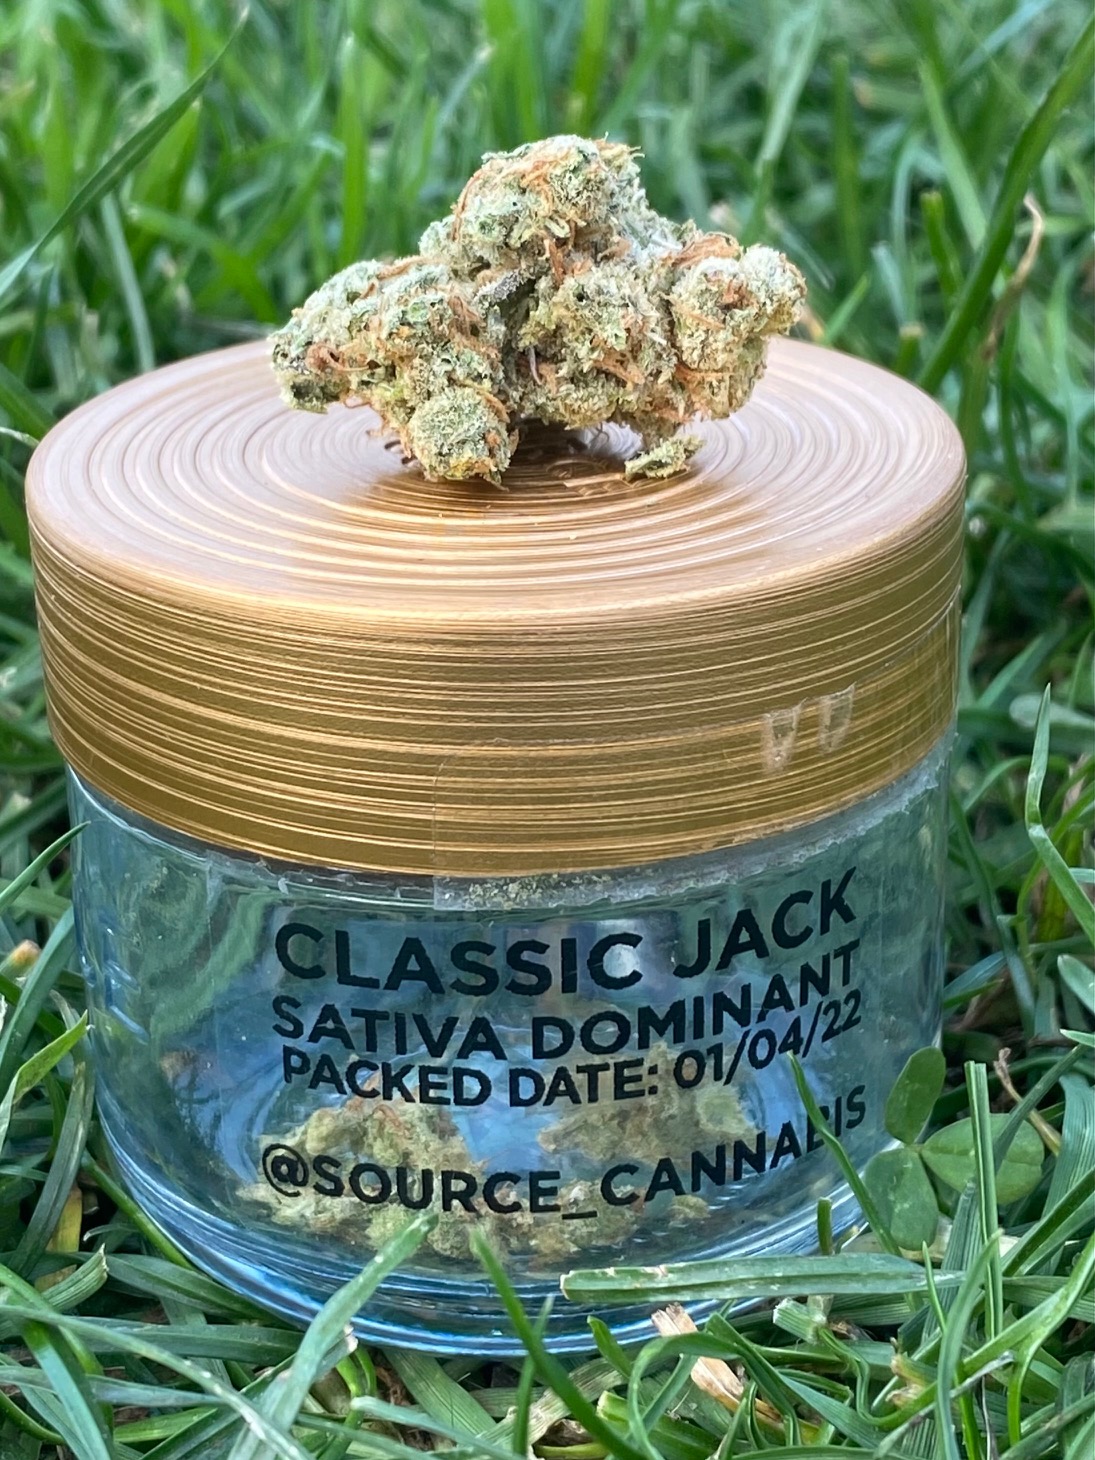 Classic Jack by Source Cannabis